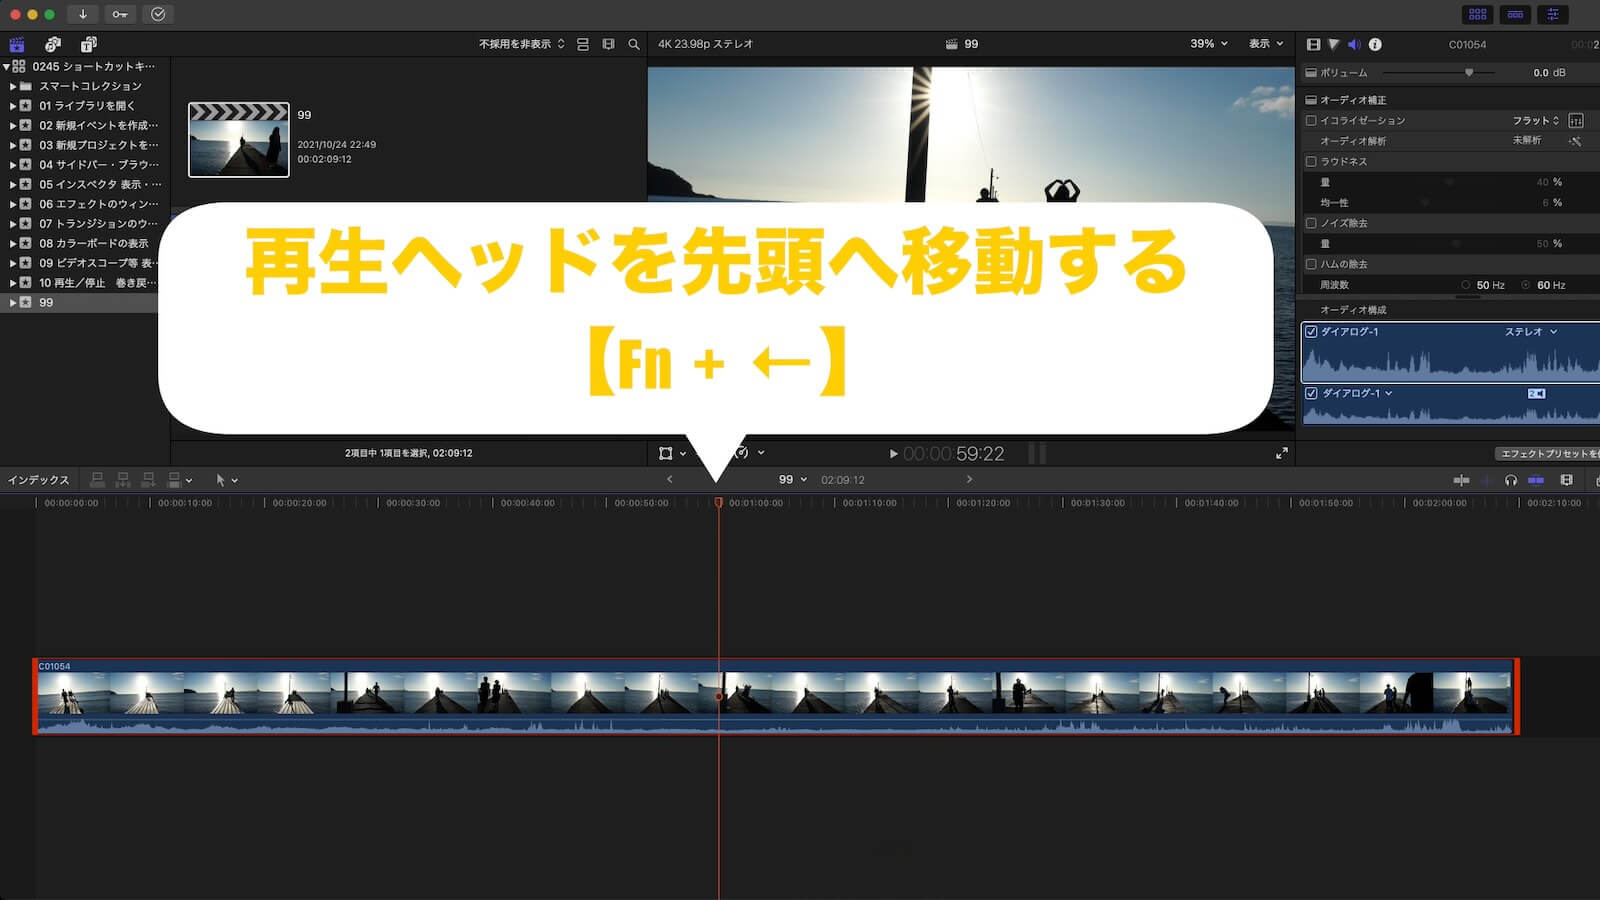 Final Cut Pro Shortcut key description image to move the playhead to the beginning